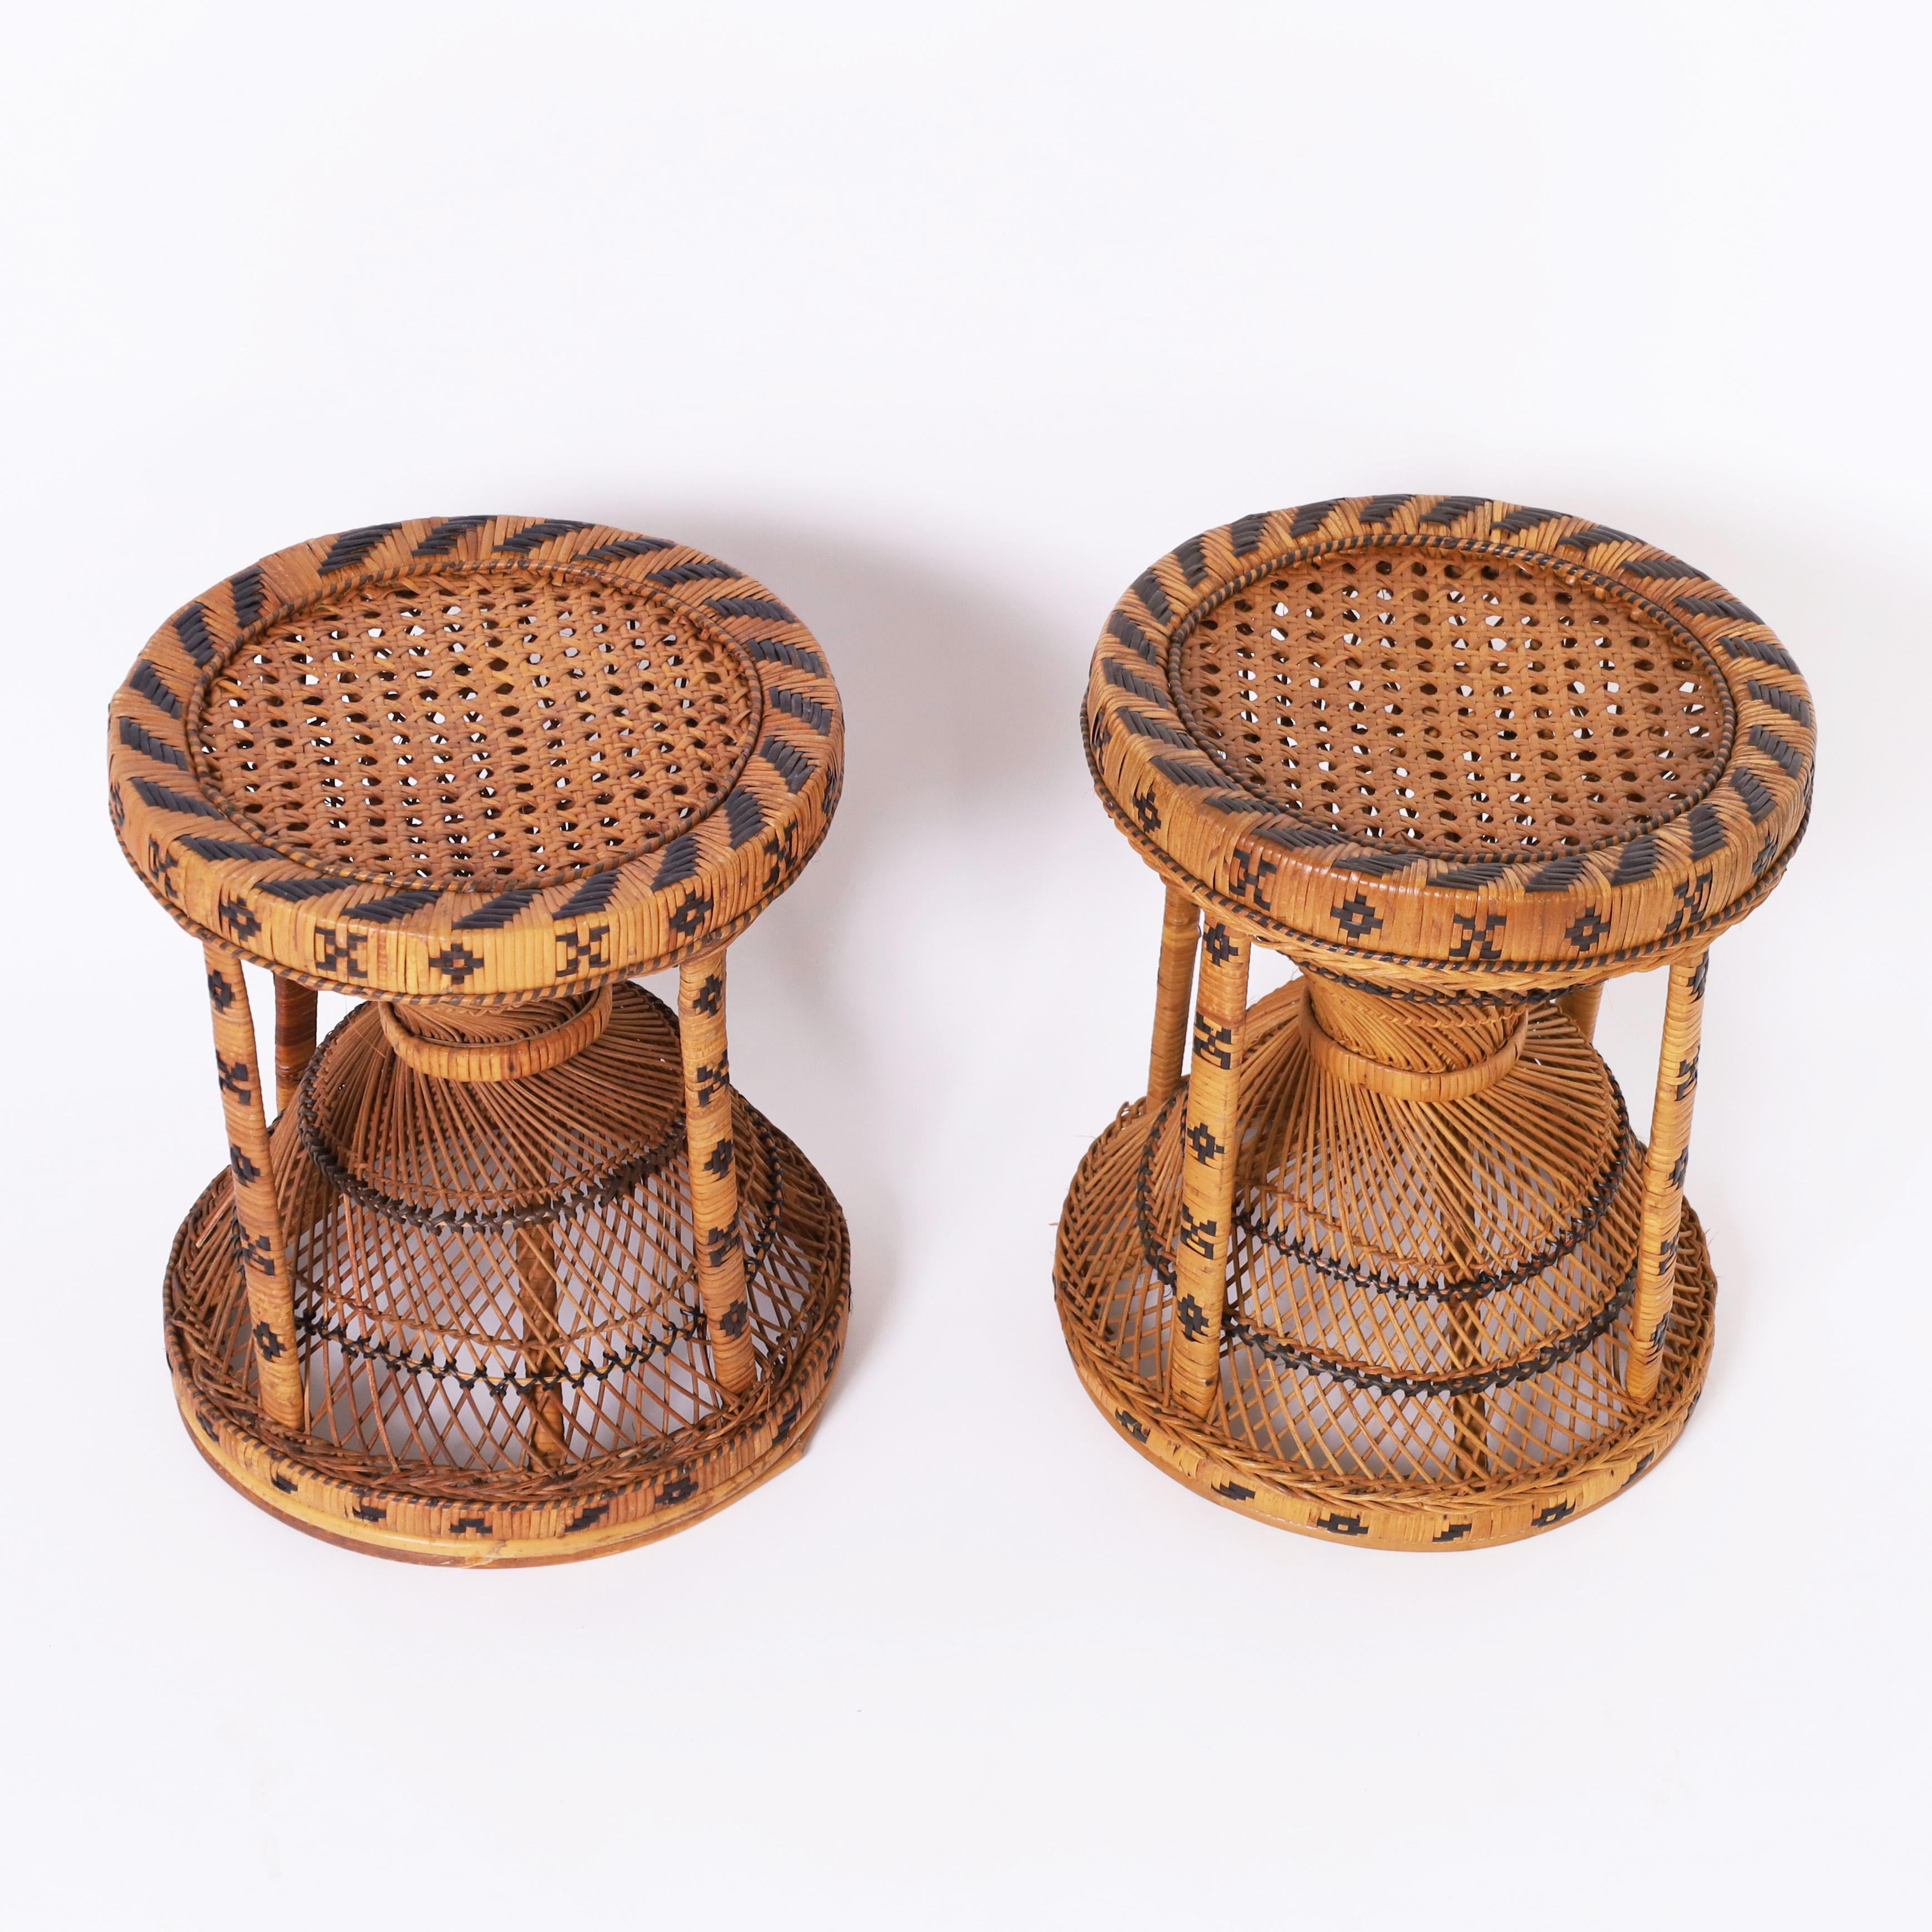 Anglo-Indian Anglo Indian Pair of Wicker Stools or Stands